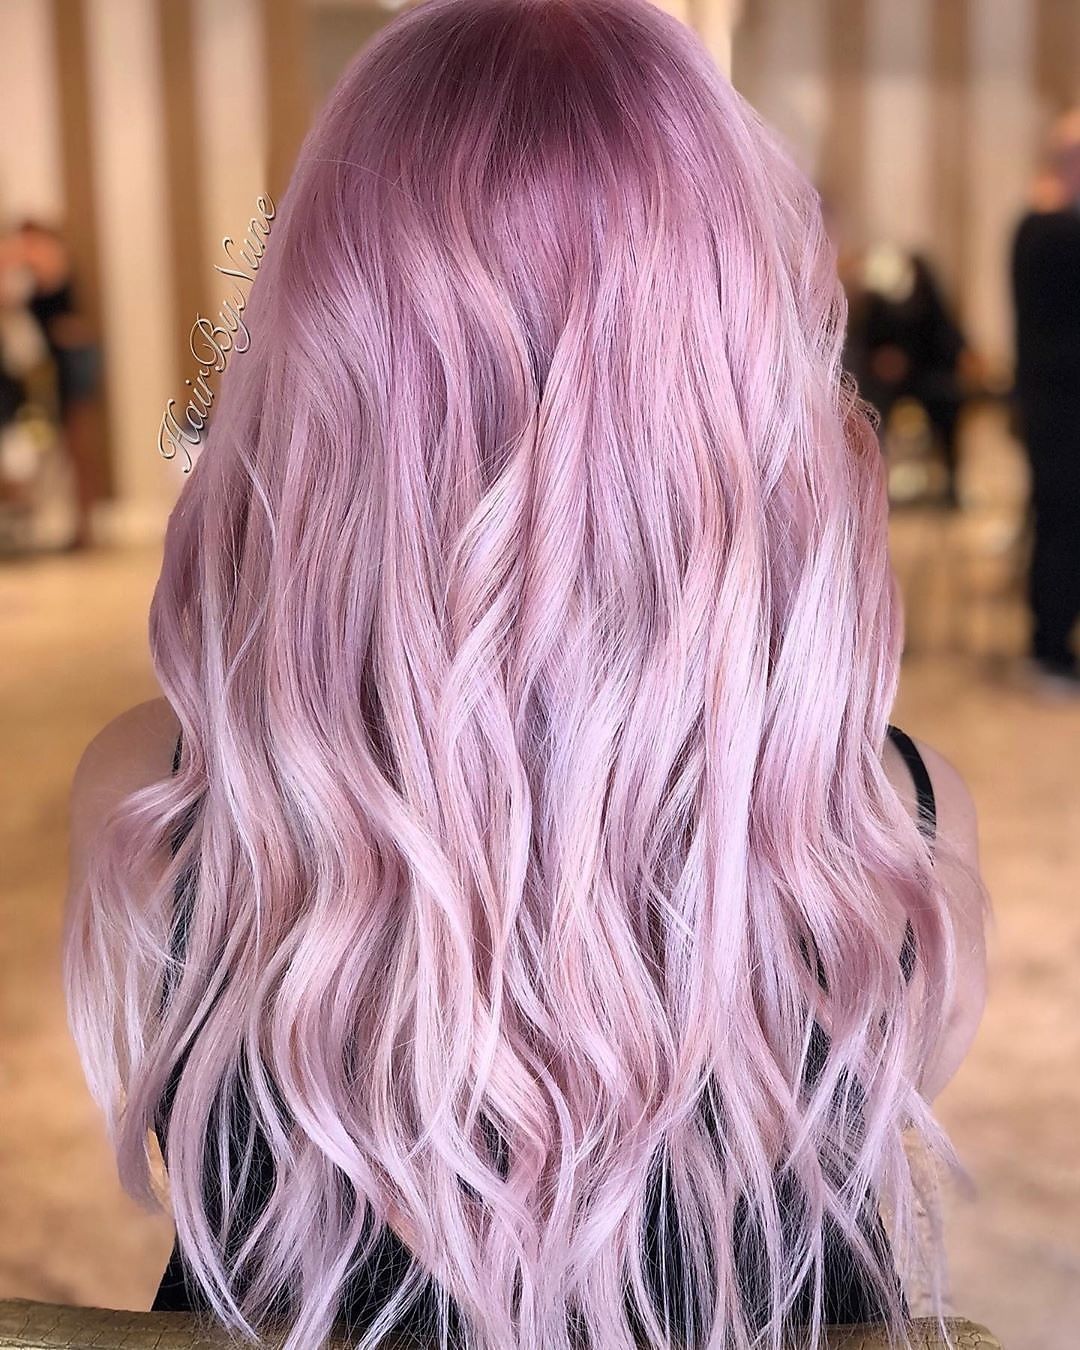 Schwarzkopf Professional - You're M E L T I N G our hearts 💕
*Formula* 👉 @hairbynune mixed up #IGORAVIBRANCE 0.89 + 0.99 + 0.88 + 0.77 for the most gorgeous pink!
#MOREVIBRANCE #haircolour #haircolor...